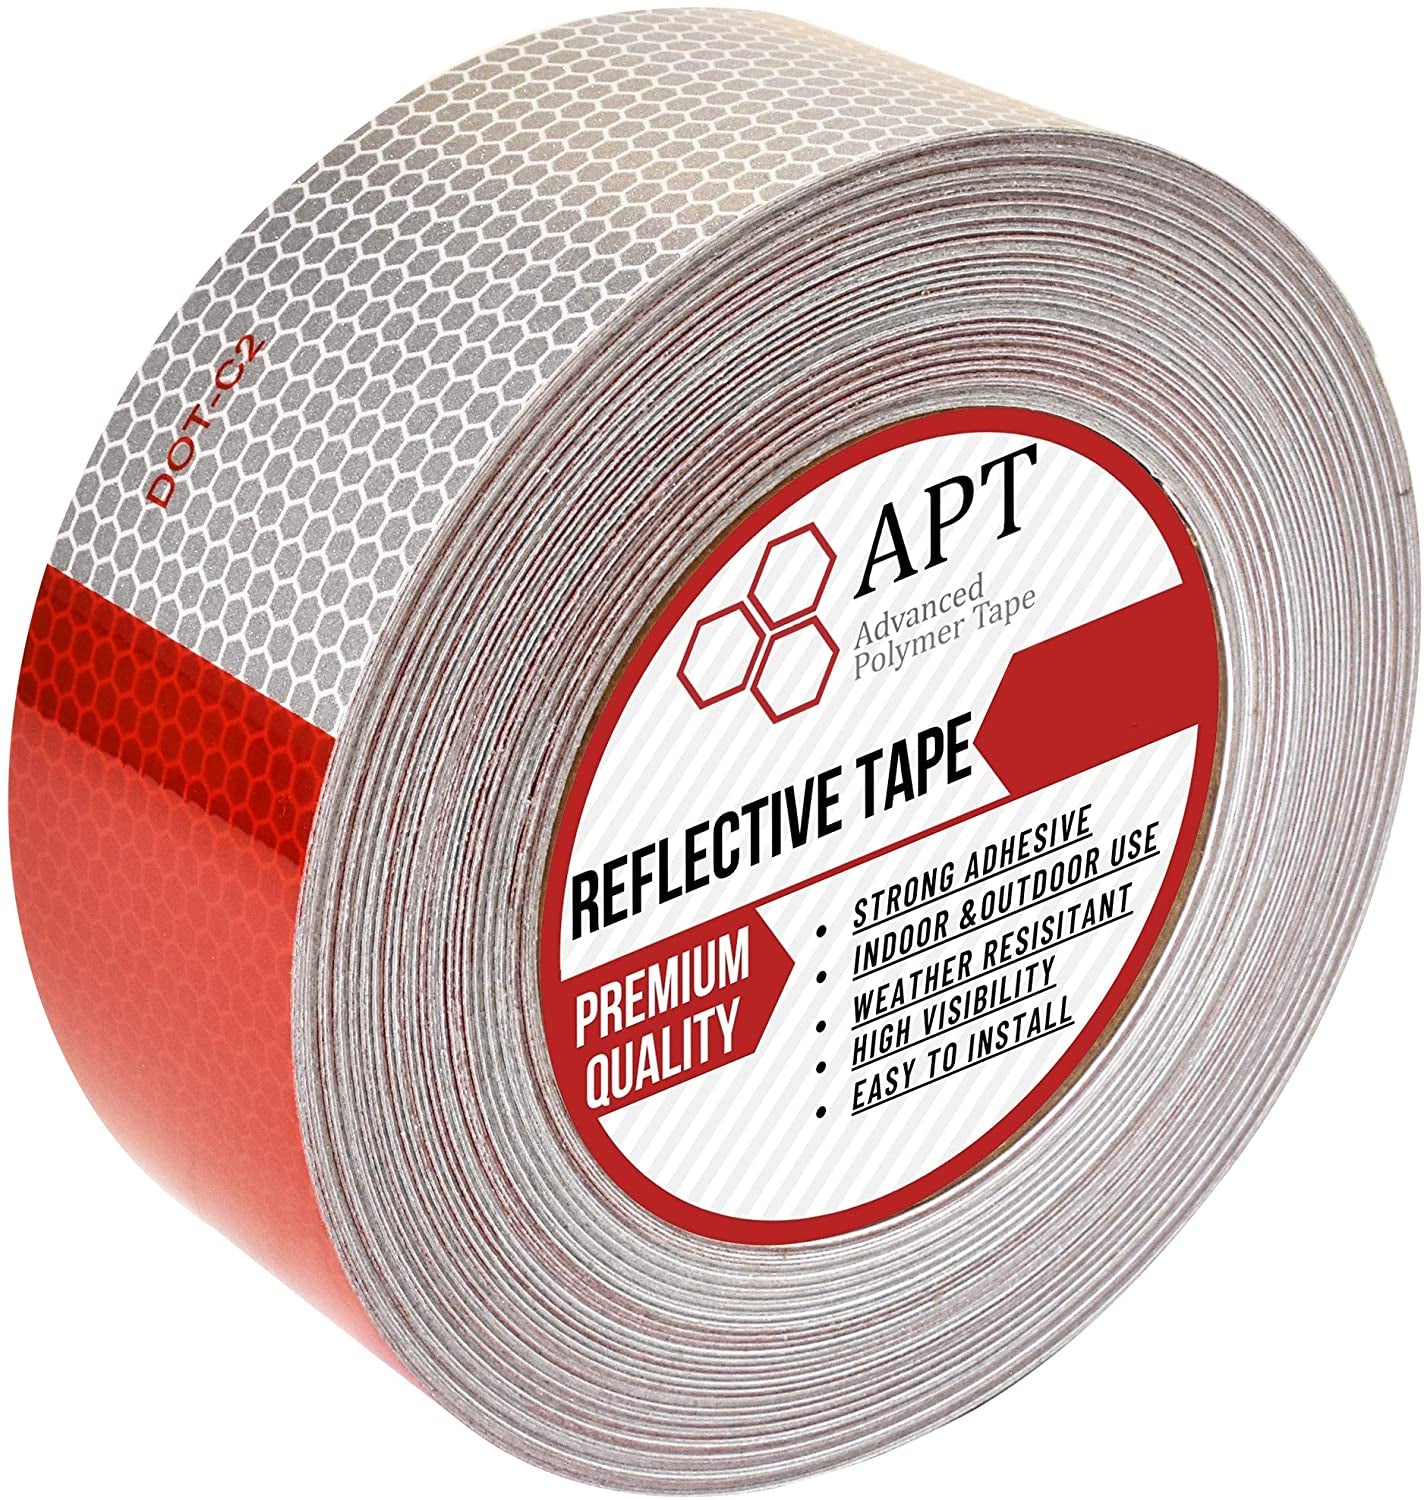 DOT Conspicuity Tape: Everything What You Need to Know About